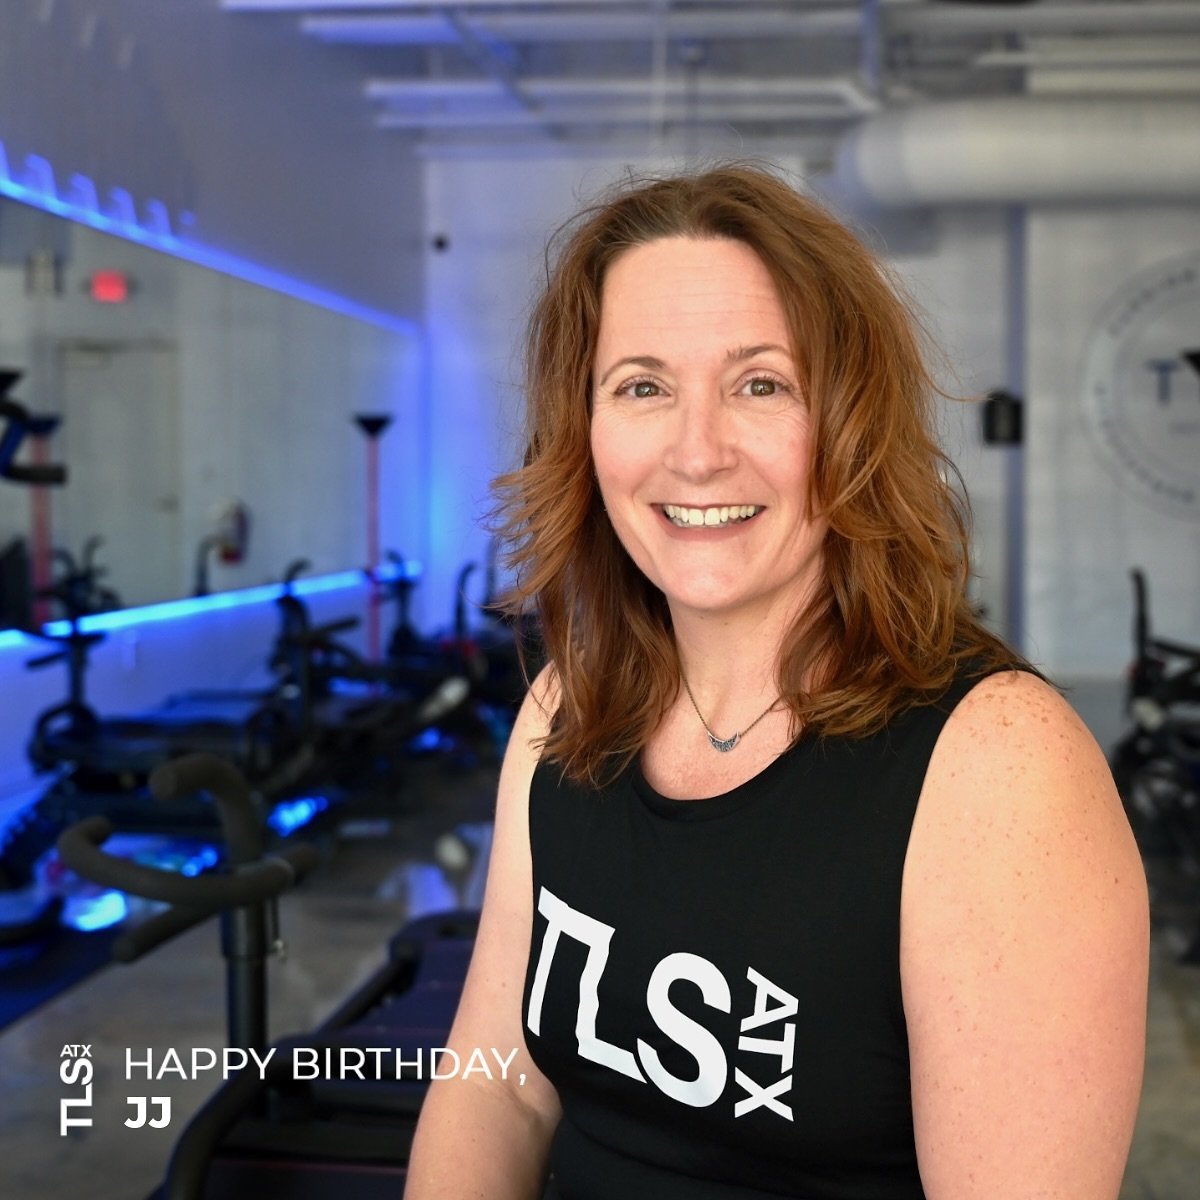 HAPPY BIRTHDAY TO JJ!

🍳🏃🏻&zwj;♀️ JJ&rsquo;s favorite Lagree move is Scrambled eggs and for Versaclimber, sprinting!

🌬️ Her favorite teaching cue &ldquo;Slow your roll, and work that chain!&rdquo;

🎧 Her favorite &ldquo;Pump You Up Song&rdquo; 